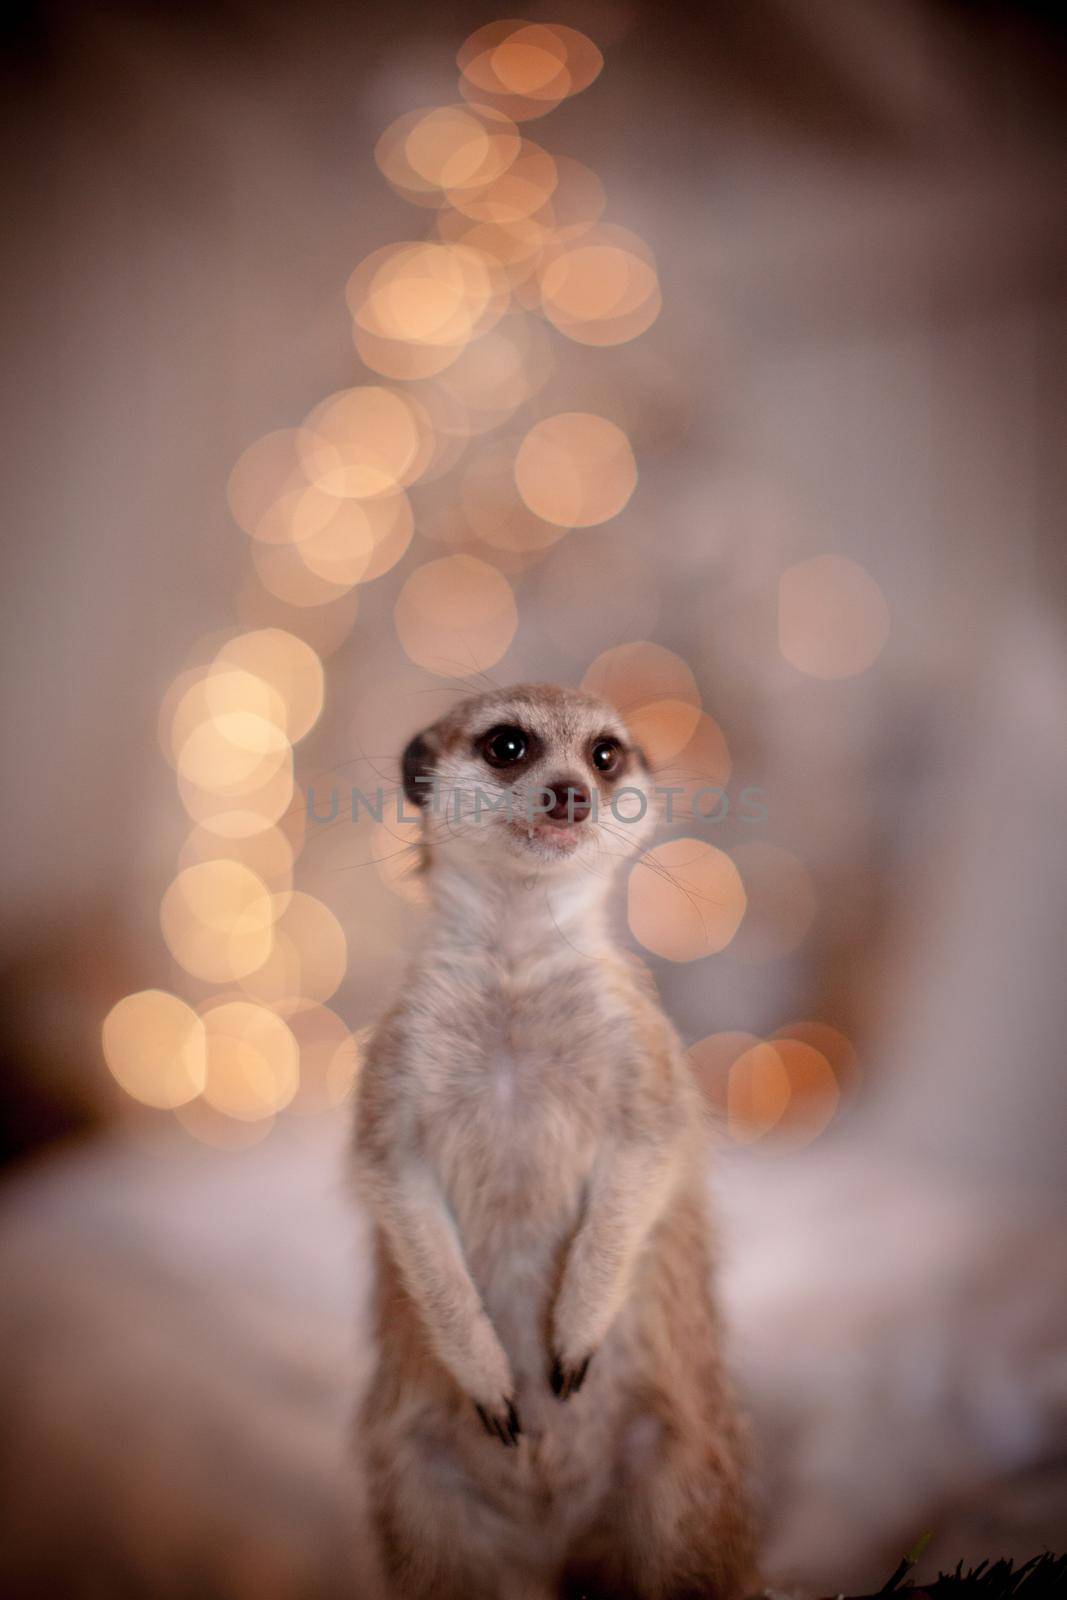 The meerkat or suricate cub in decorated room with Christmass tree. by RosaJay